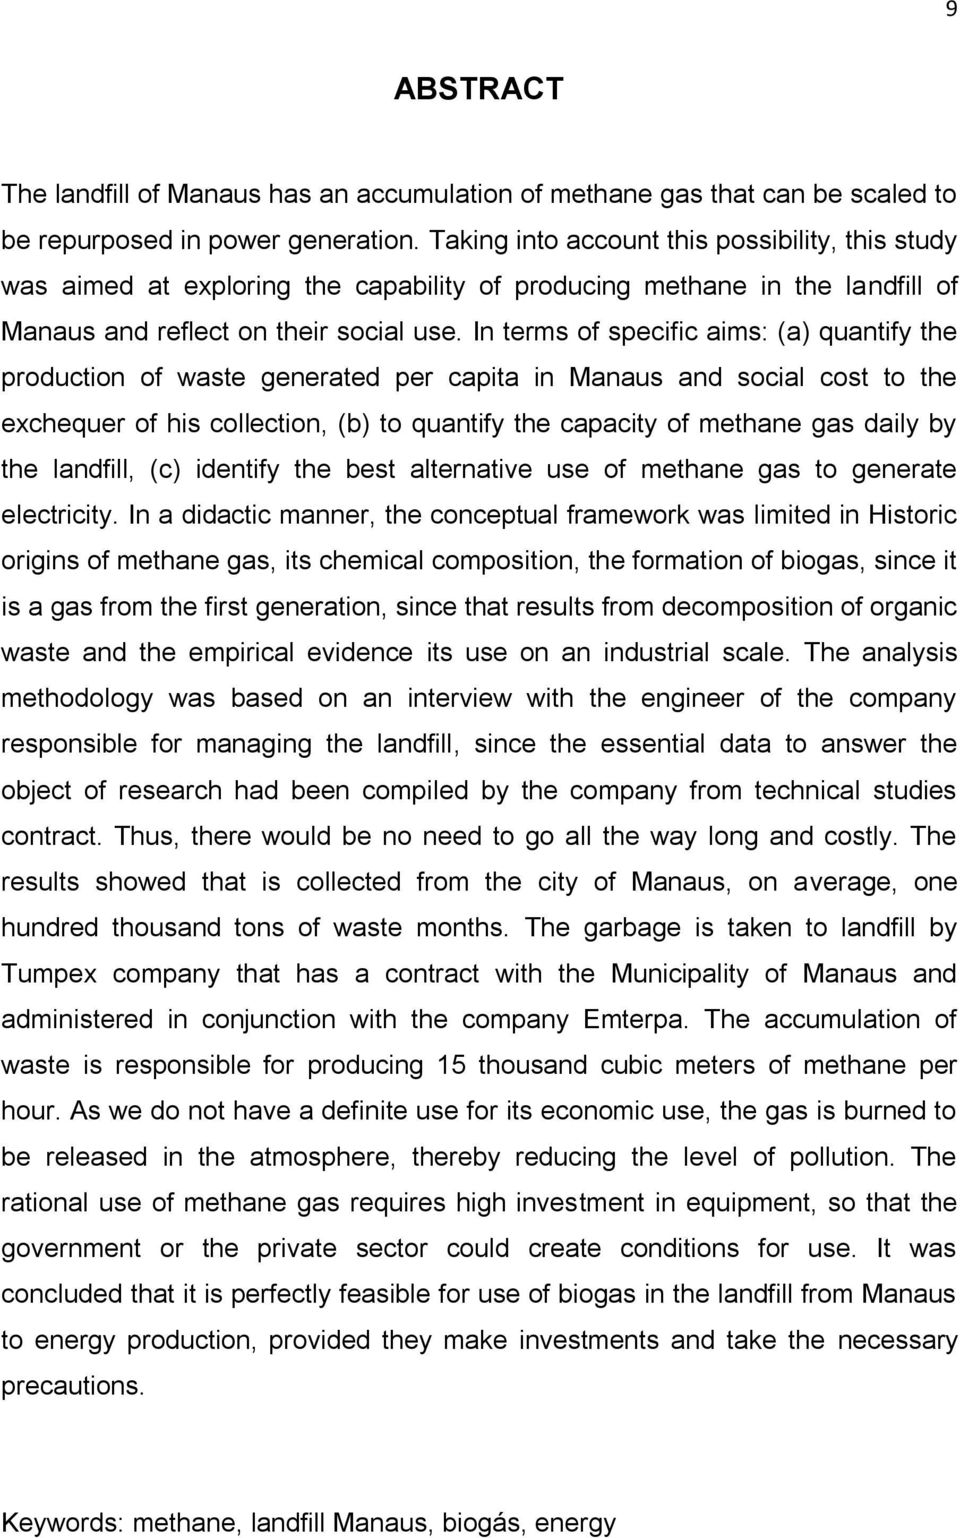 In terms of specific aims: (a) quantify the production of waste generated per capita in Manaus and social cost to the exchequer of his collection, (b) to quantify the capacity of methane gas daily by